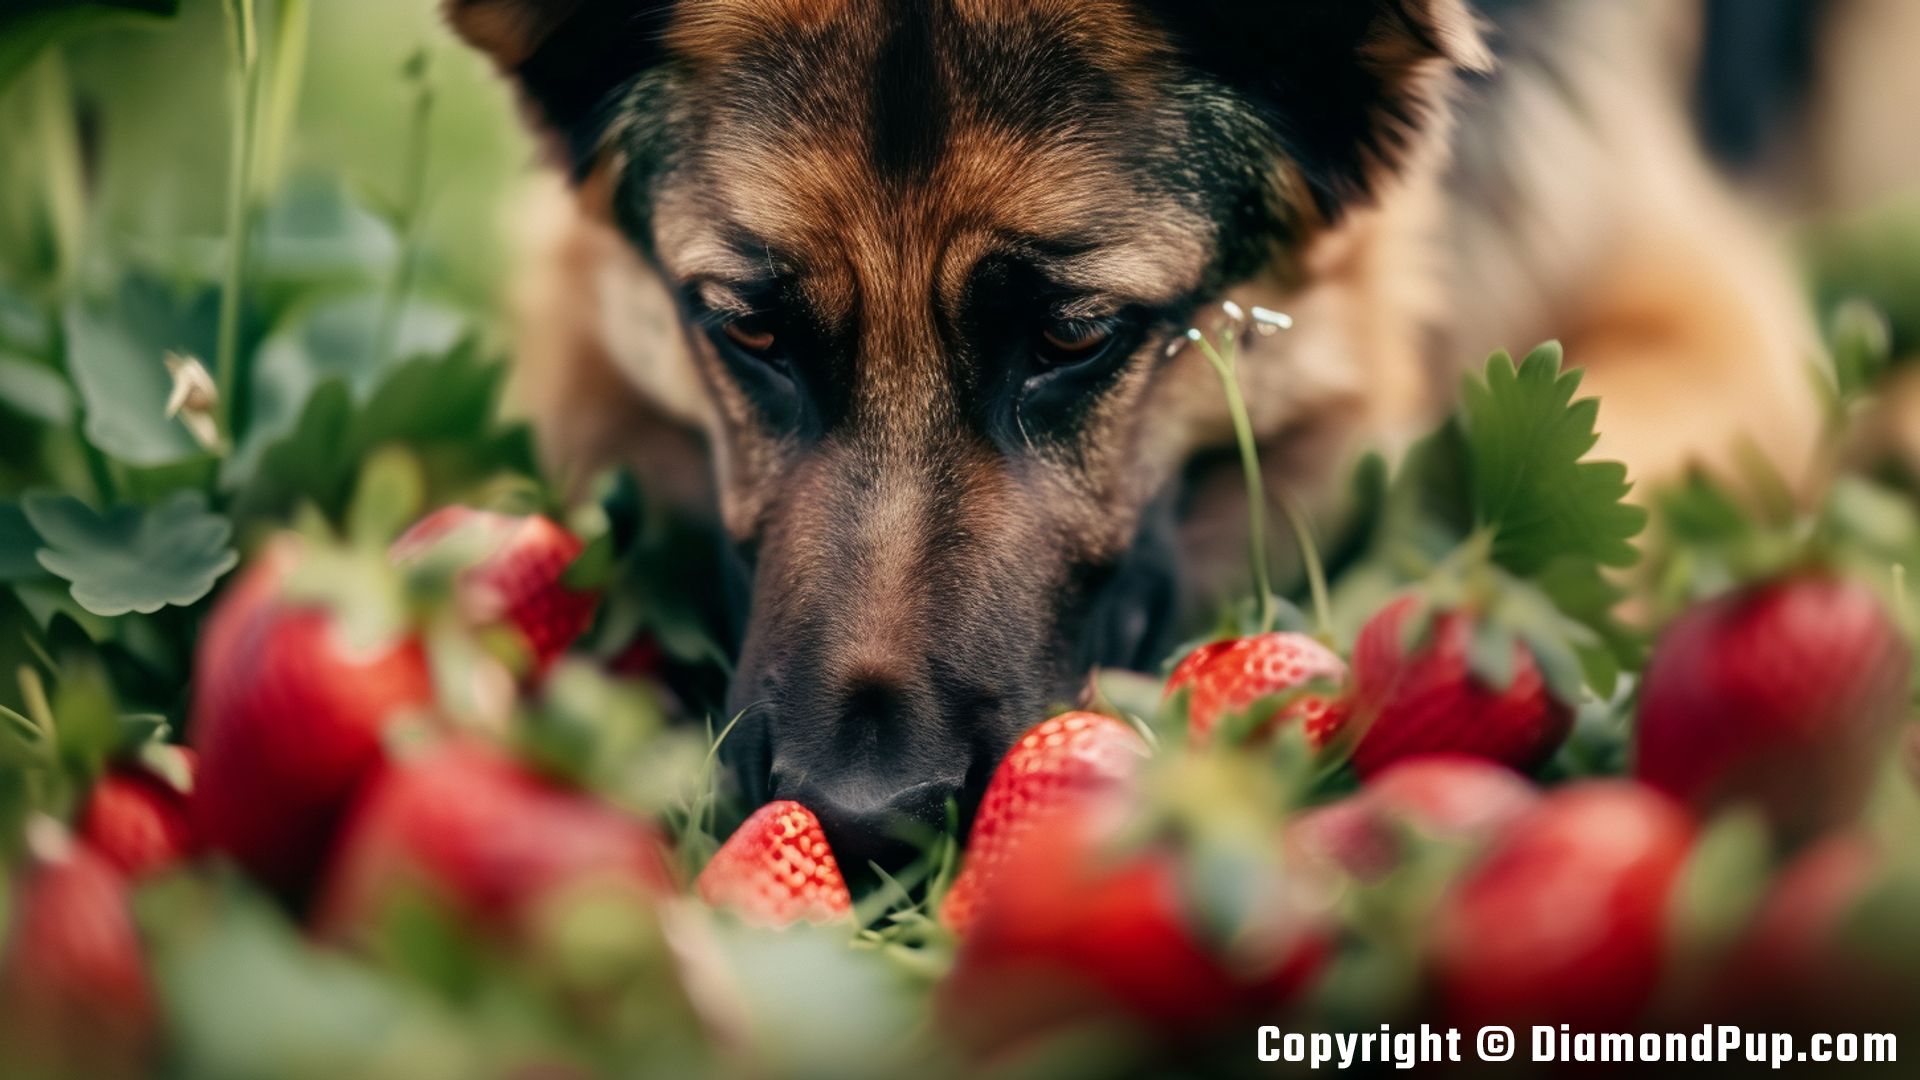 Photograph of an Adorable German Shepherd Snacking on Strawberries